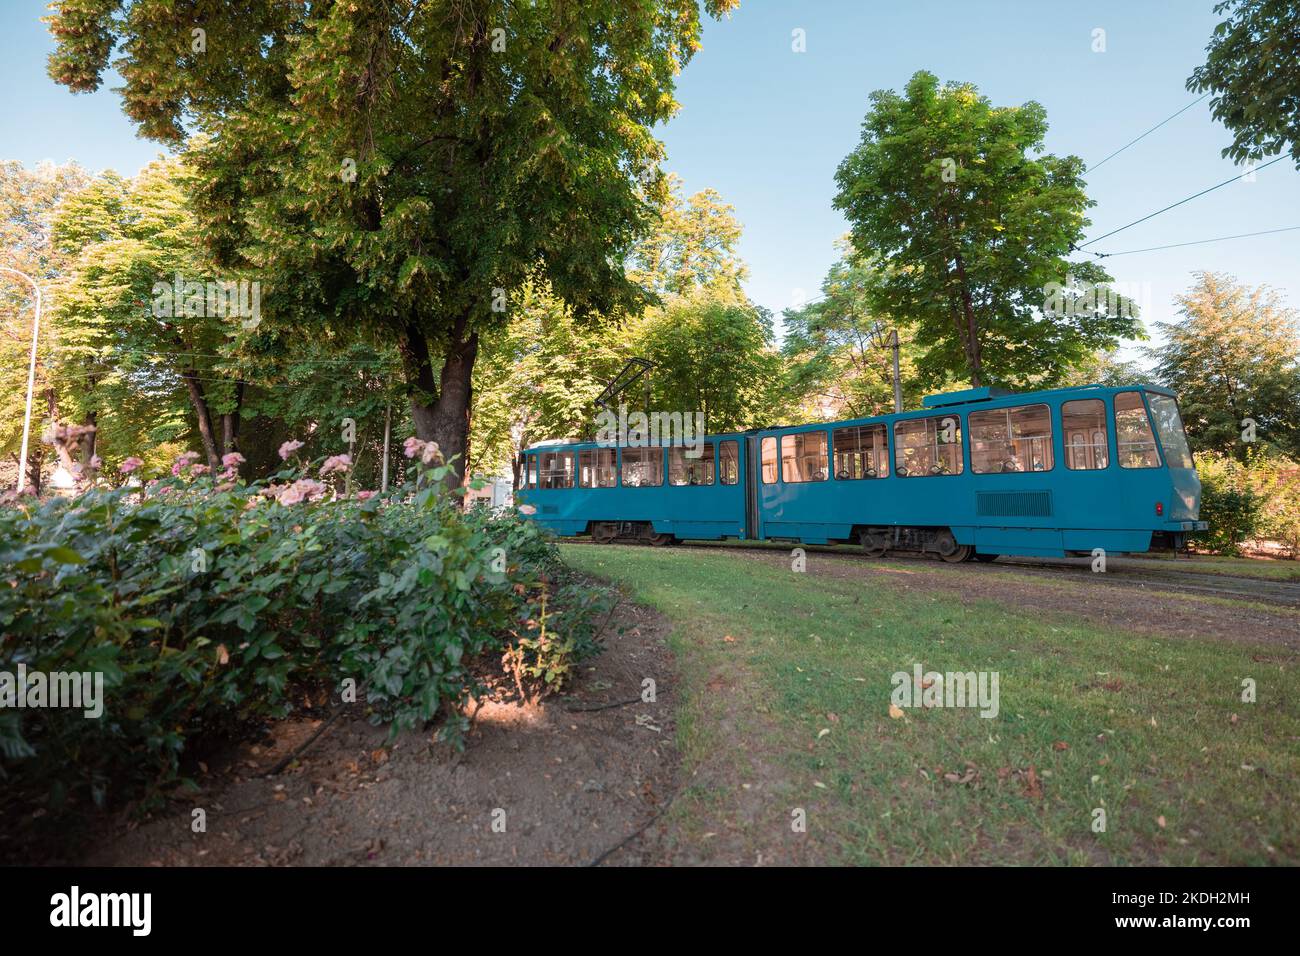 Older type of zagreb tram network is standing on a final station of a line. Zagrebacki tramvaj, consisting of many lines Stock Photo